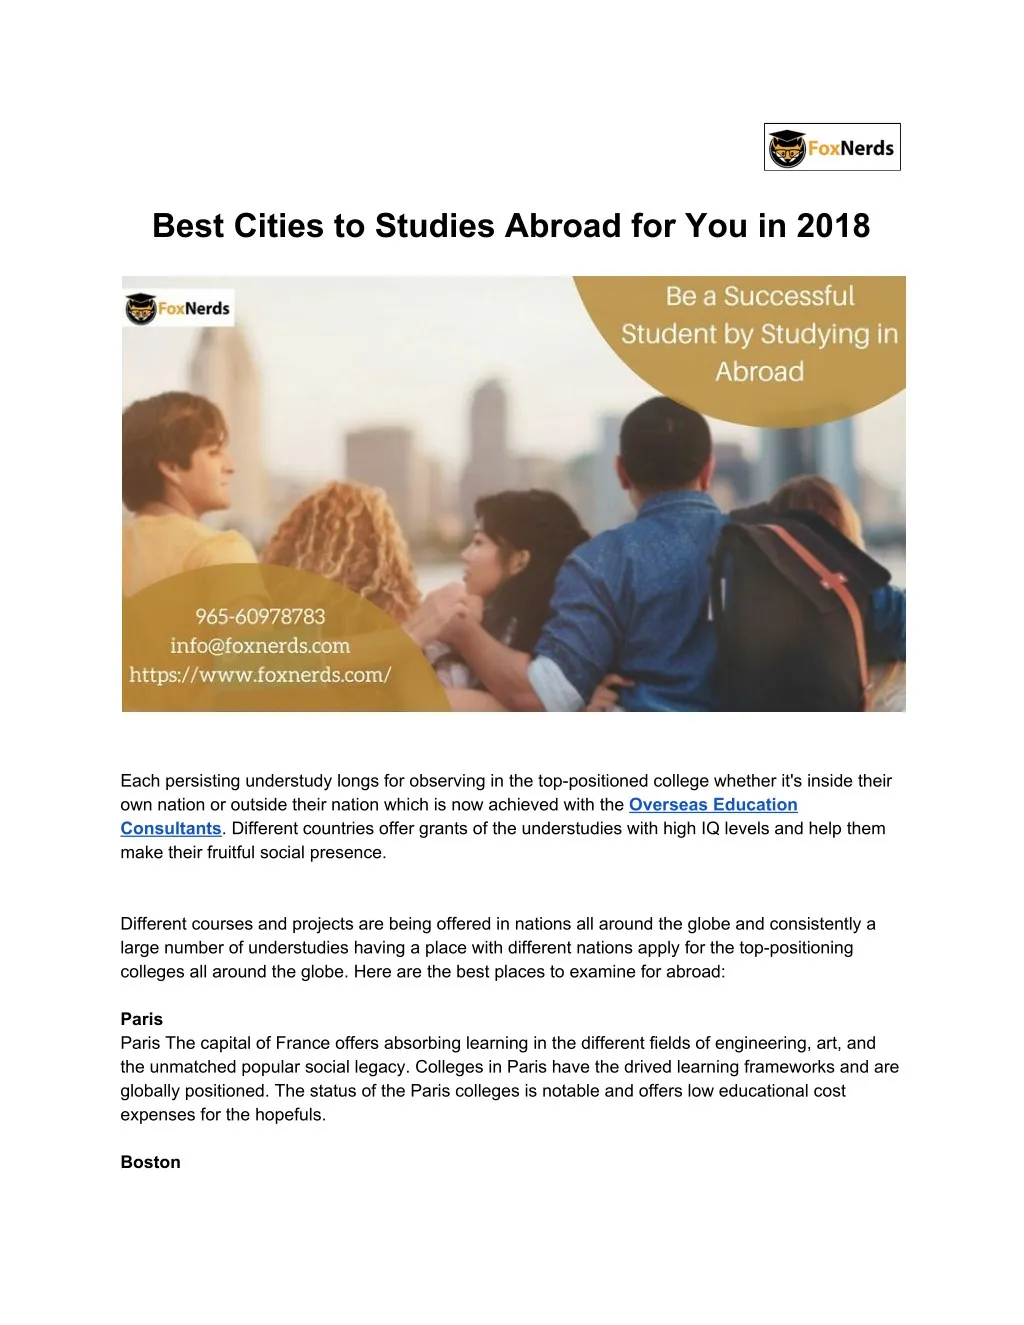 best cities to studies abroad for you in 2018